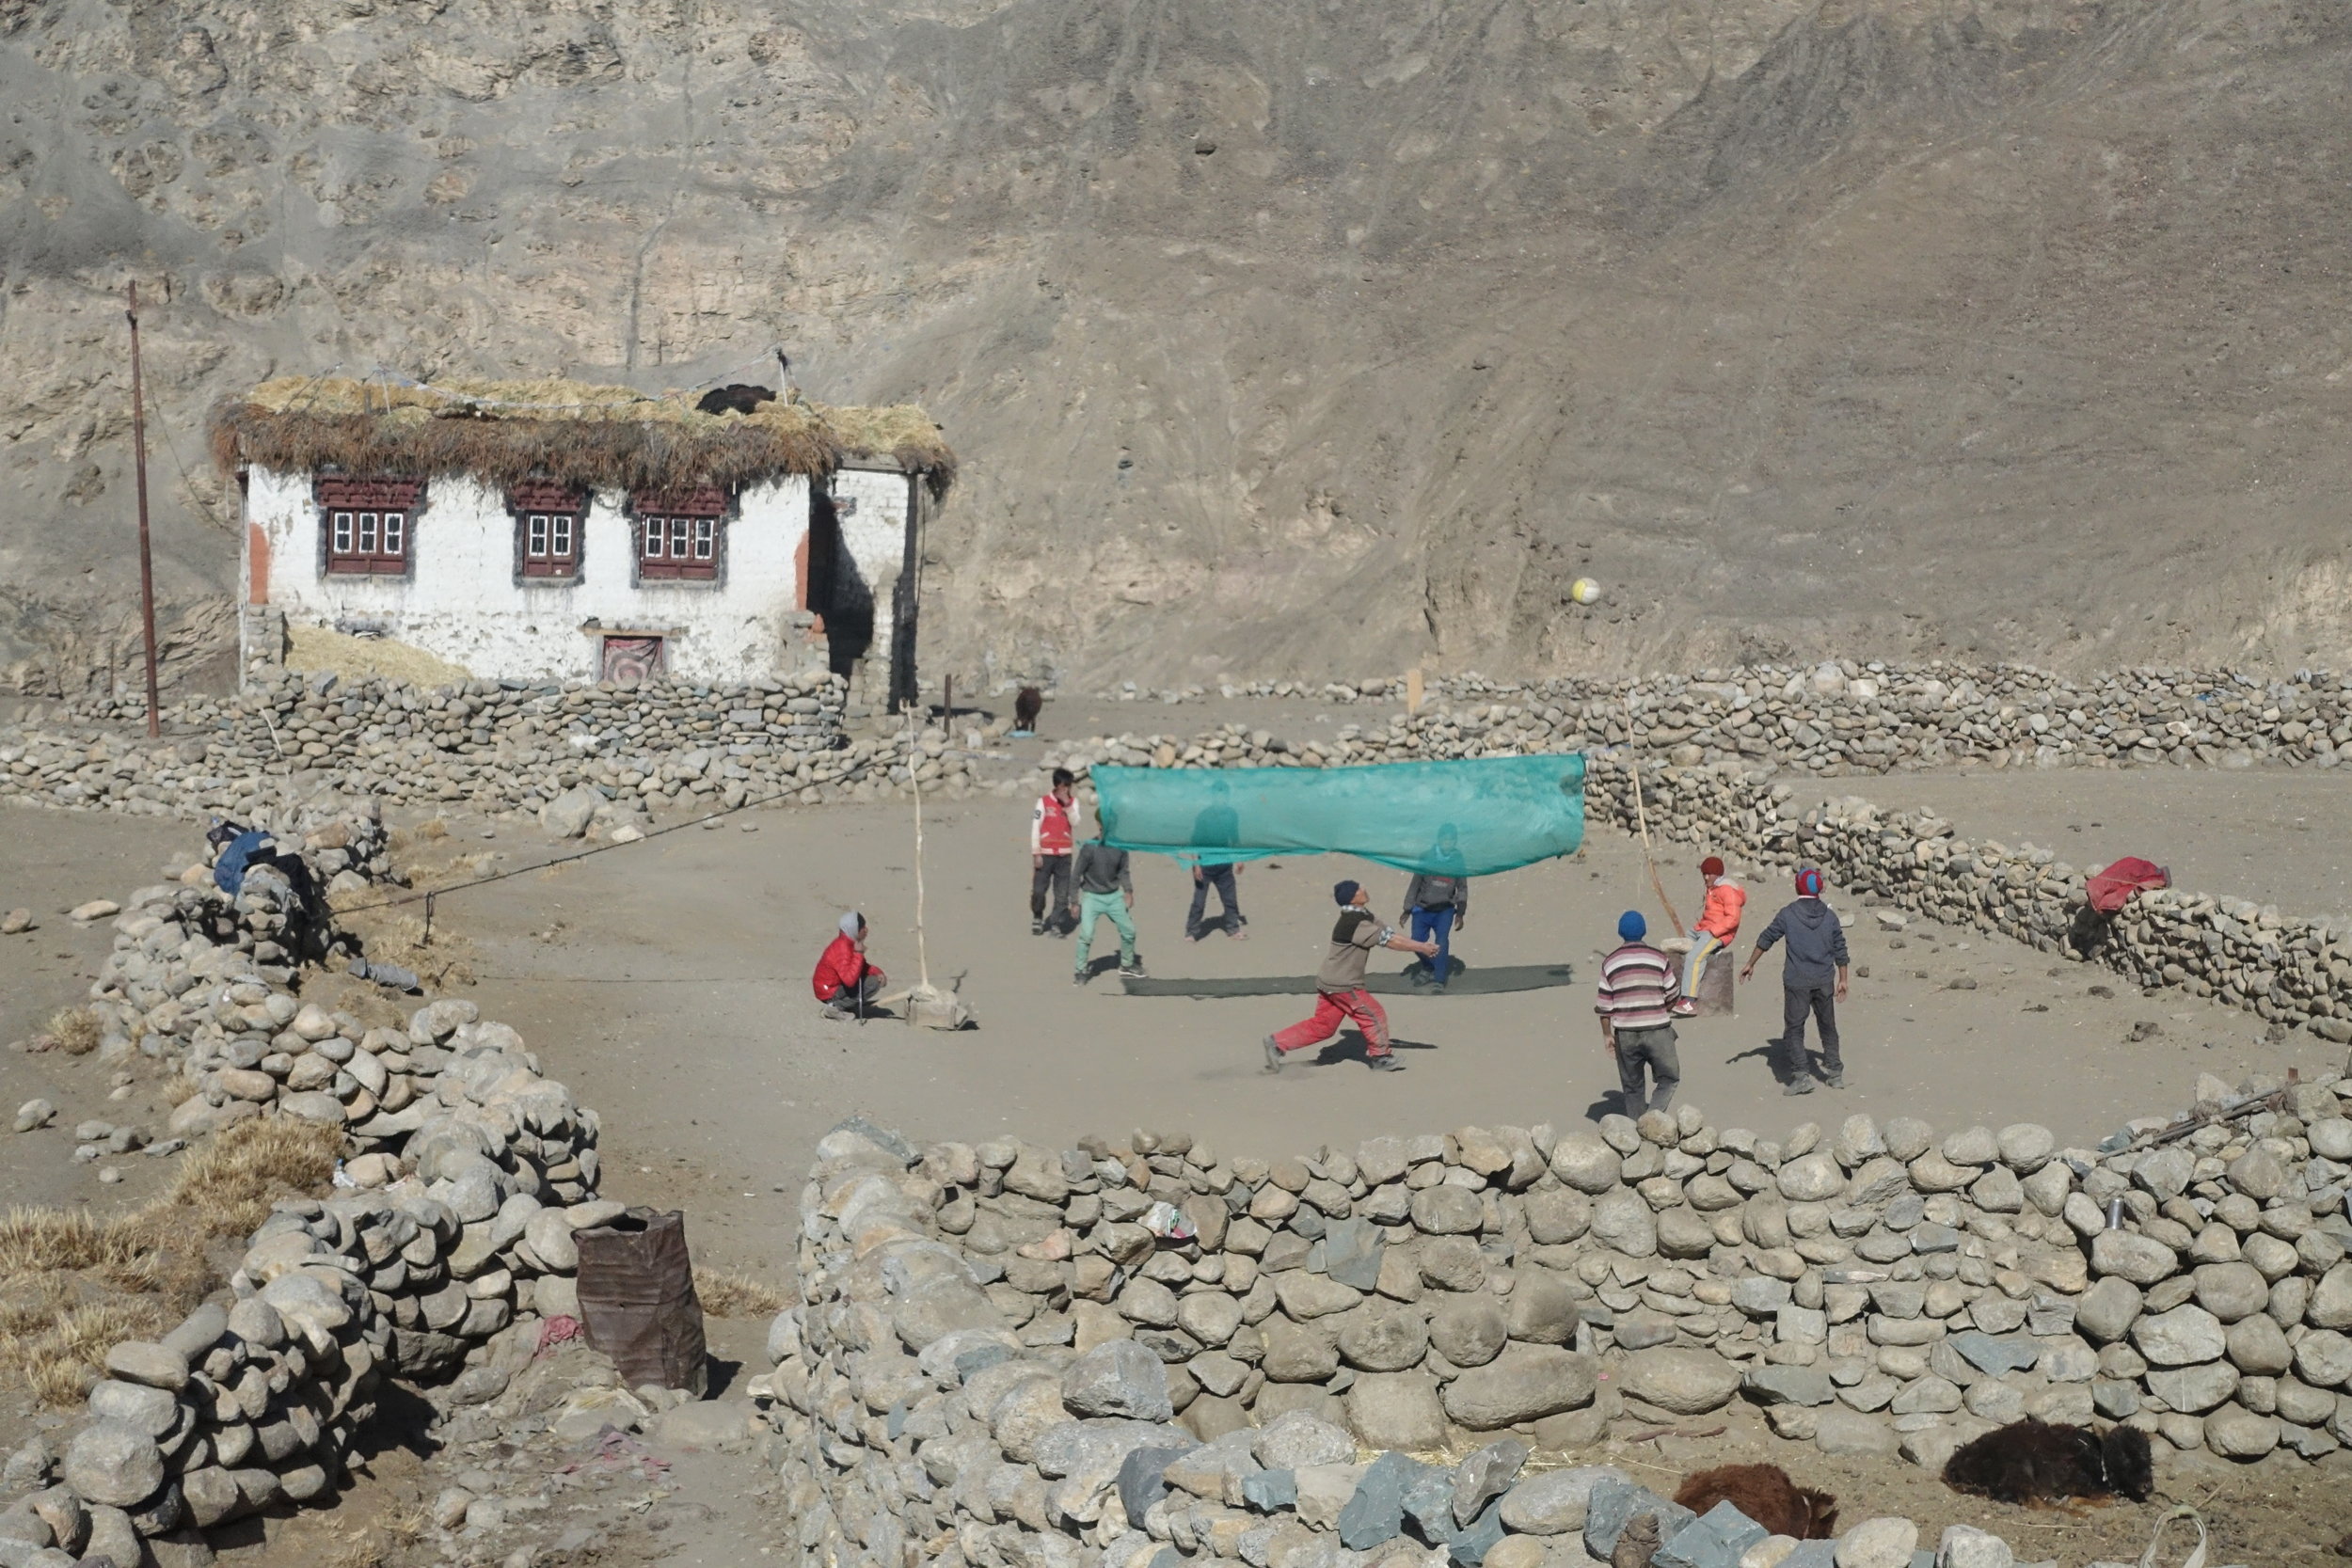 Outdoor games in the small village of Gya, which will host the forthcoming sustainability winter school